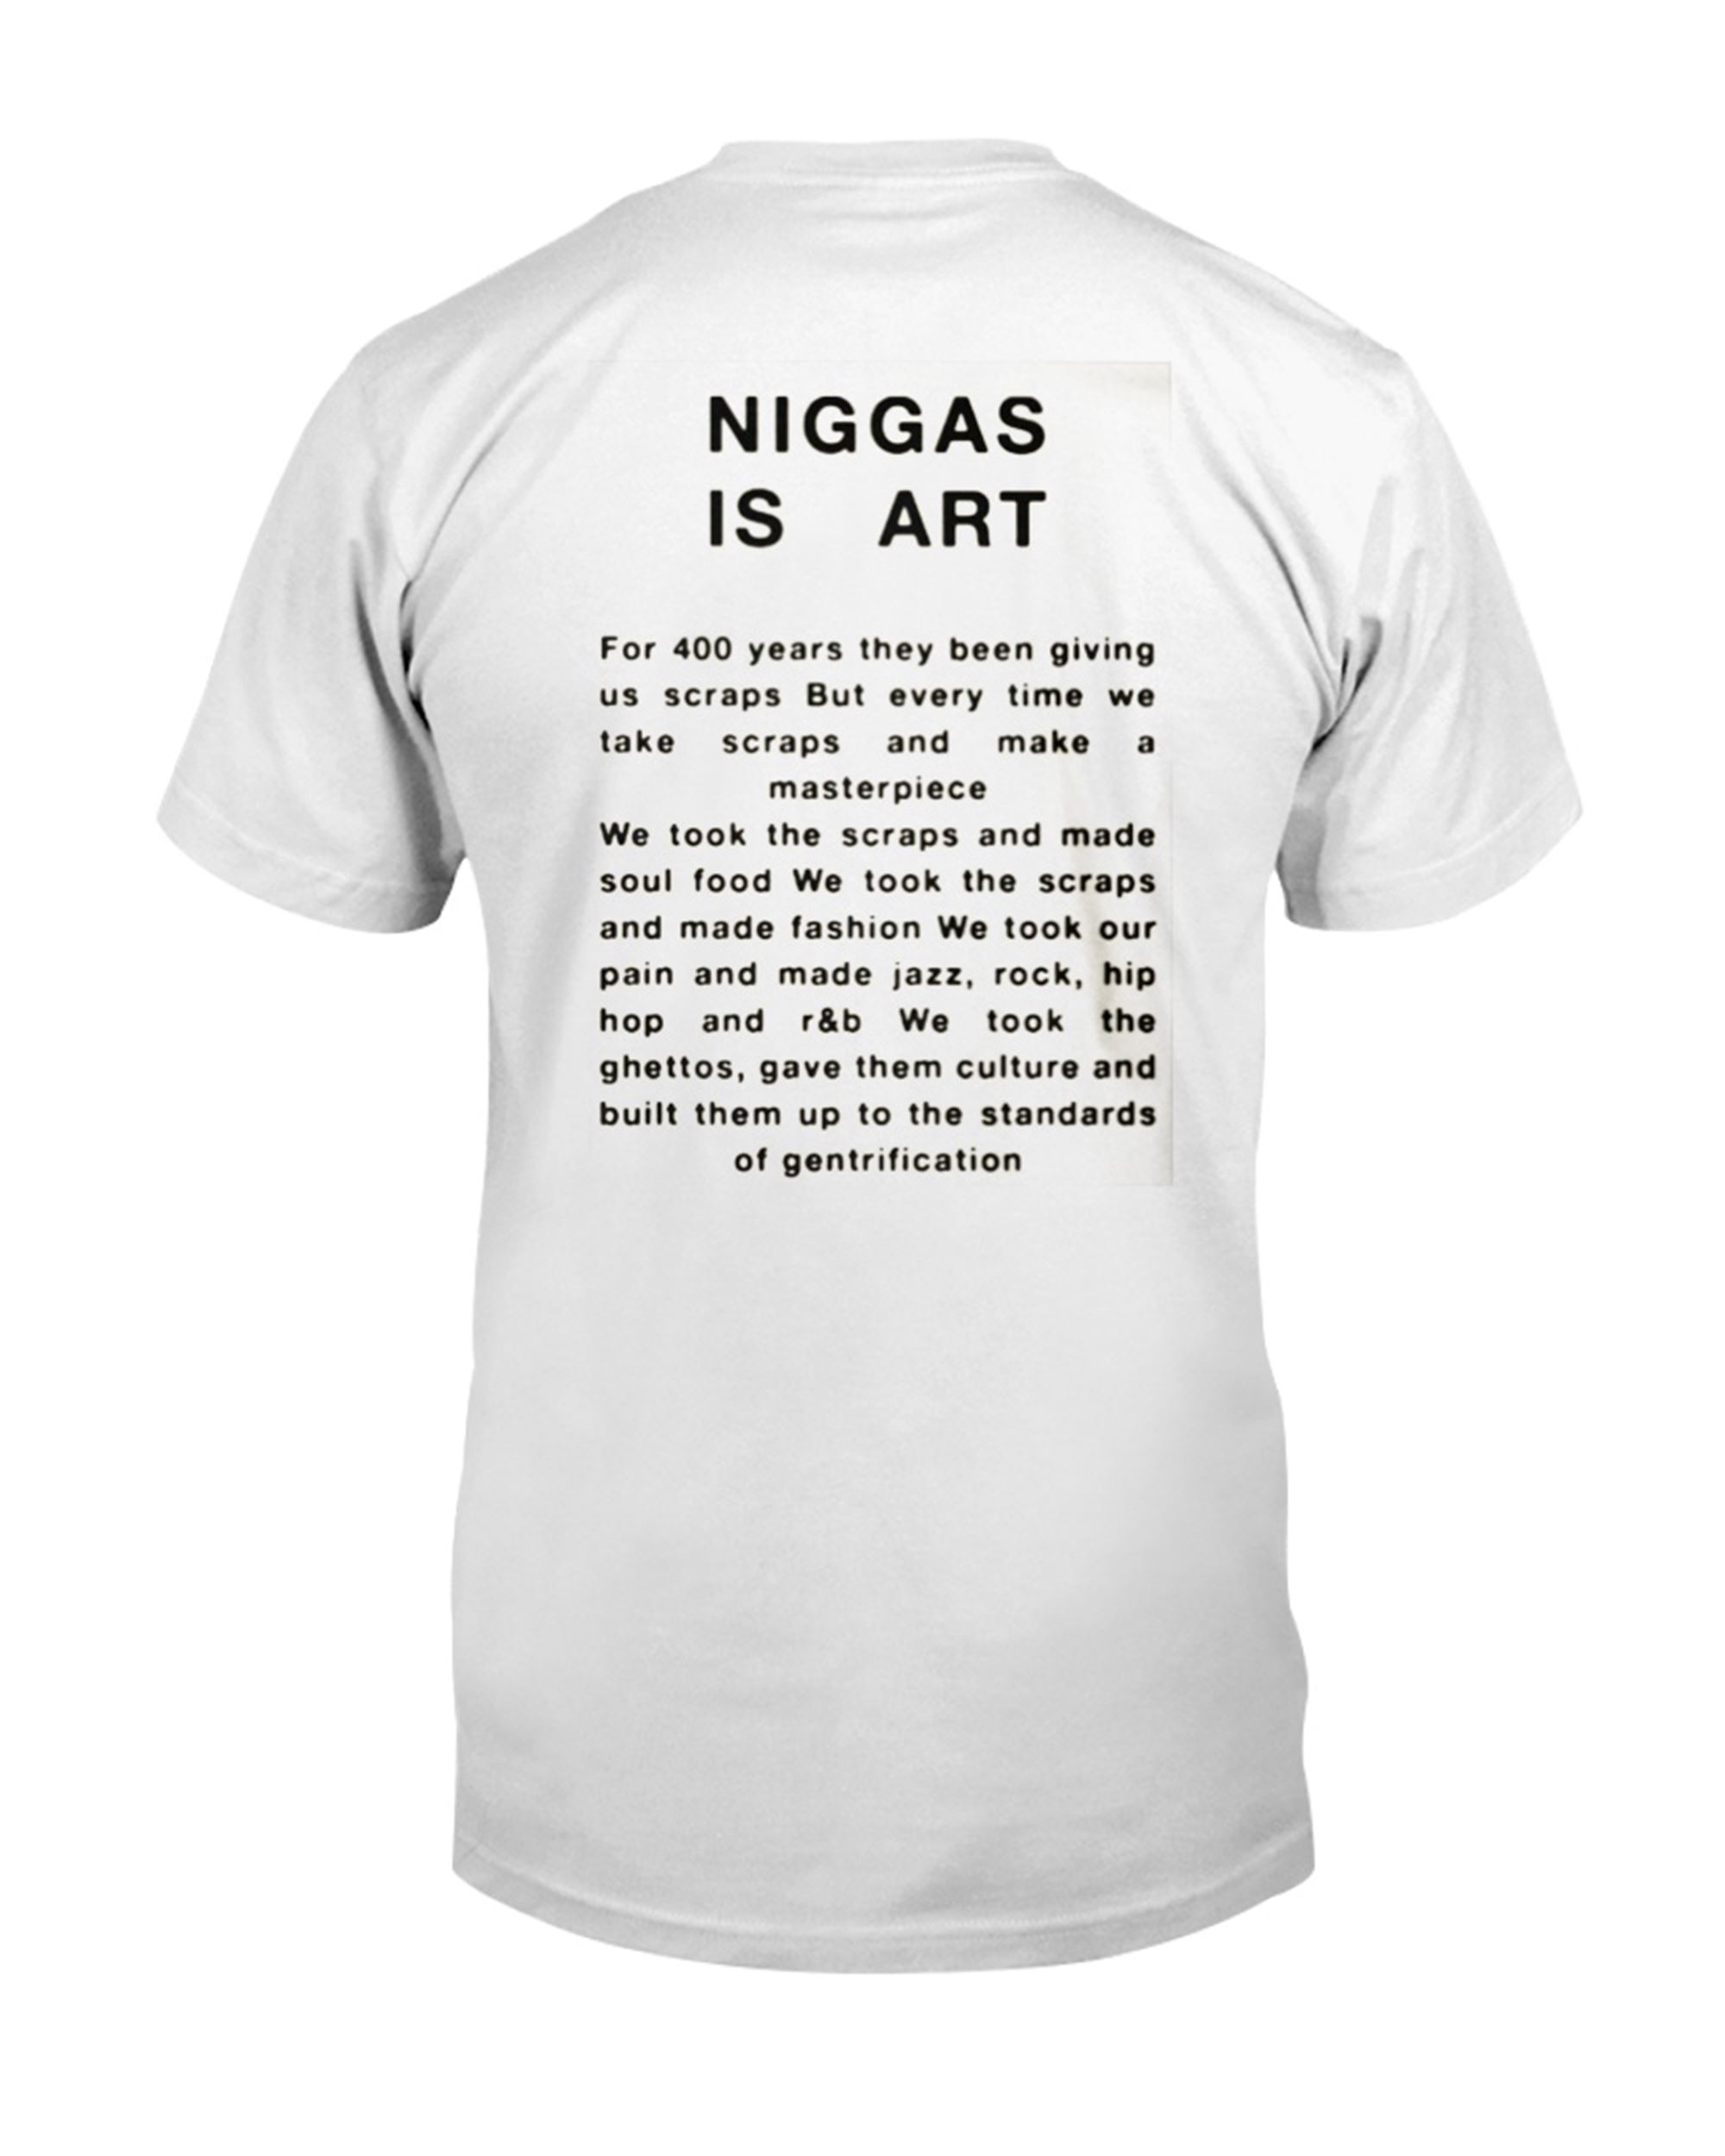 Niggas Is Art Shirt For 400 Years They Been Giving Us Scraps But Every Time We Take Scraps